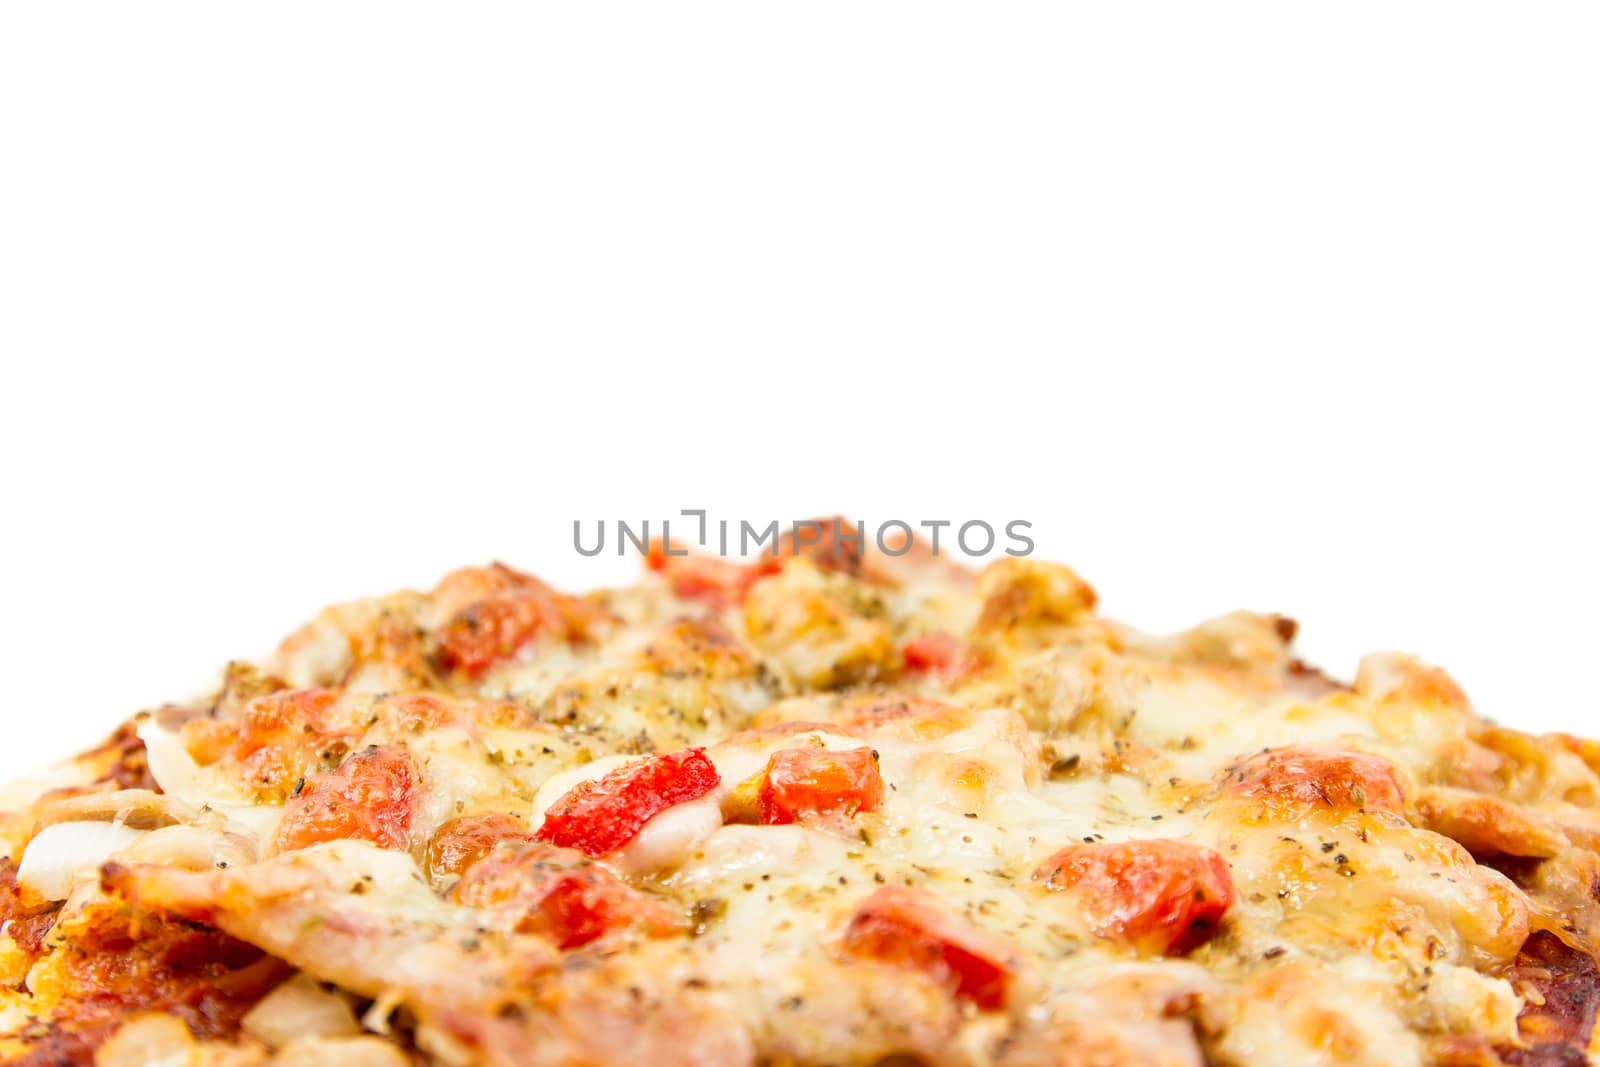 Pizza, Italian cuisine, on plate isolated on white background